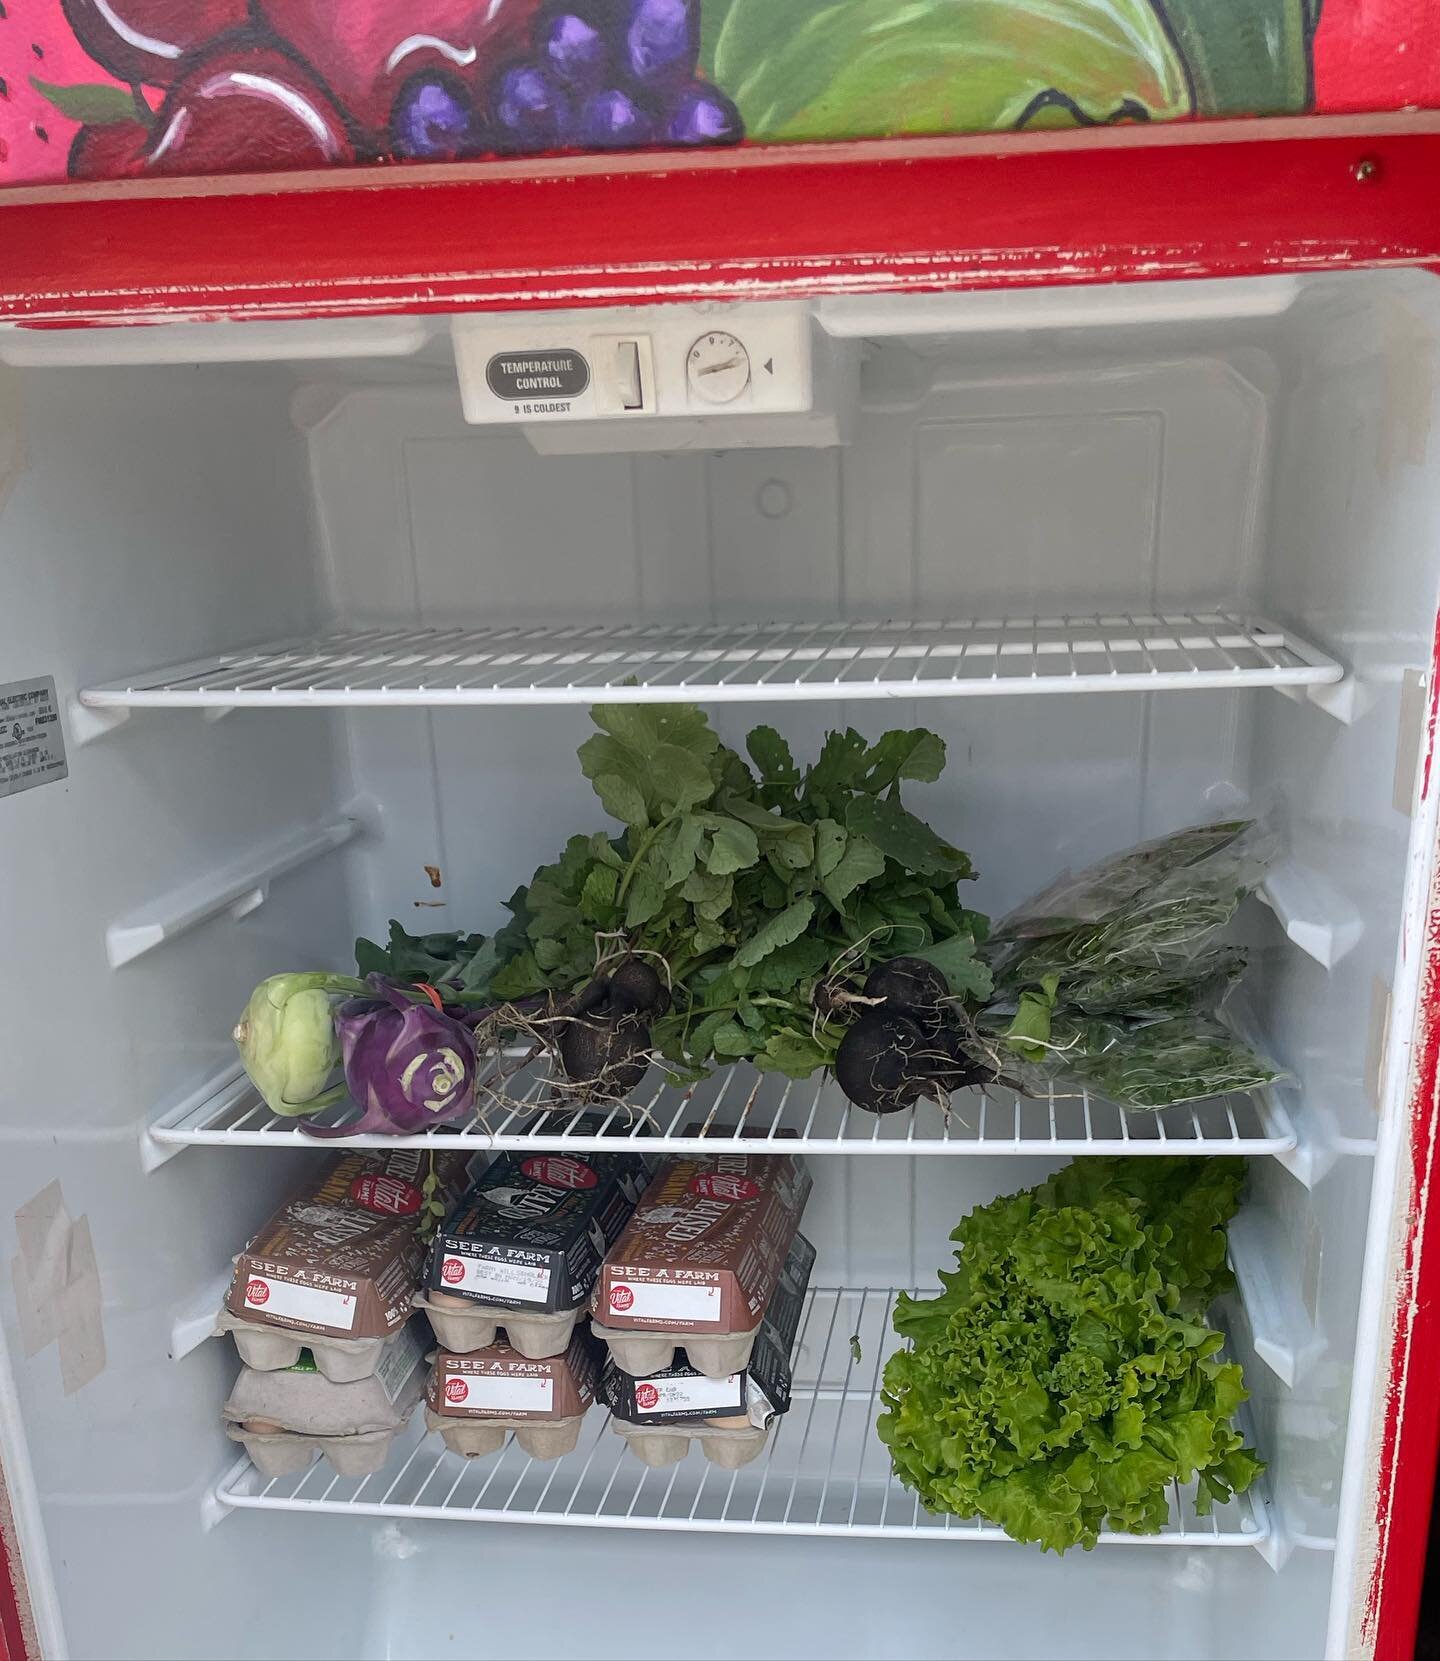 Every Sunday that we go to @amquistationfarmersmarket , we go to @nashvillecommunityfridge to drop off fresh eggs, veggies, herbs, and homemade offerings

If you&rsquo;re a farmer or producer that has extra offerings after market, we are happy to tak